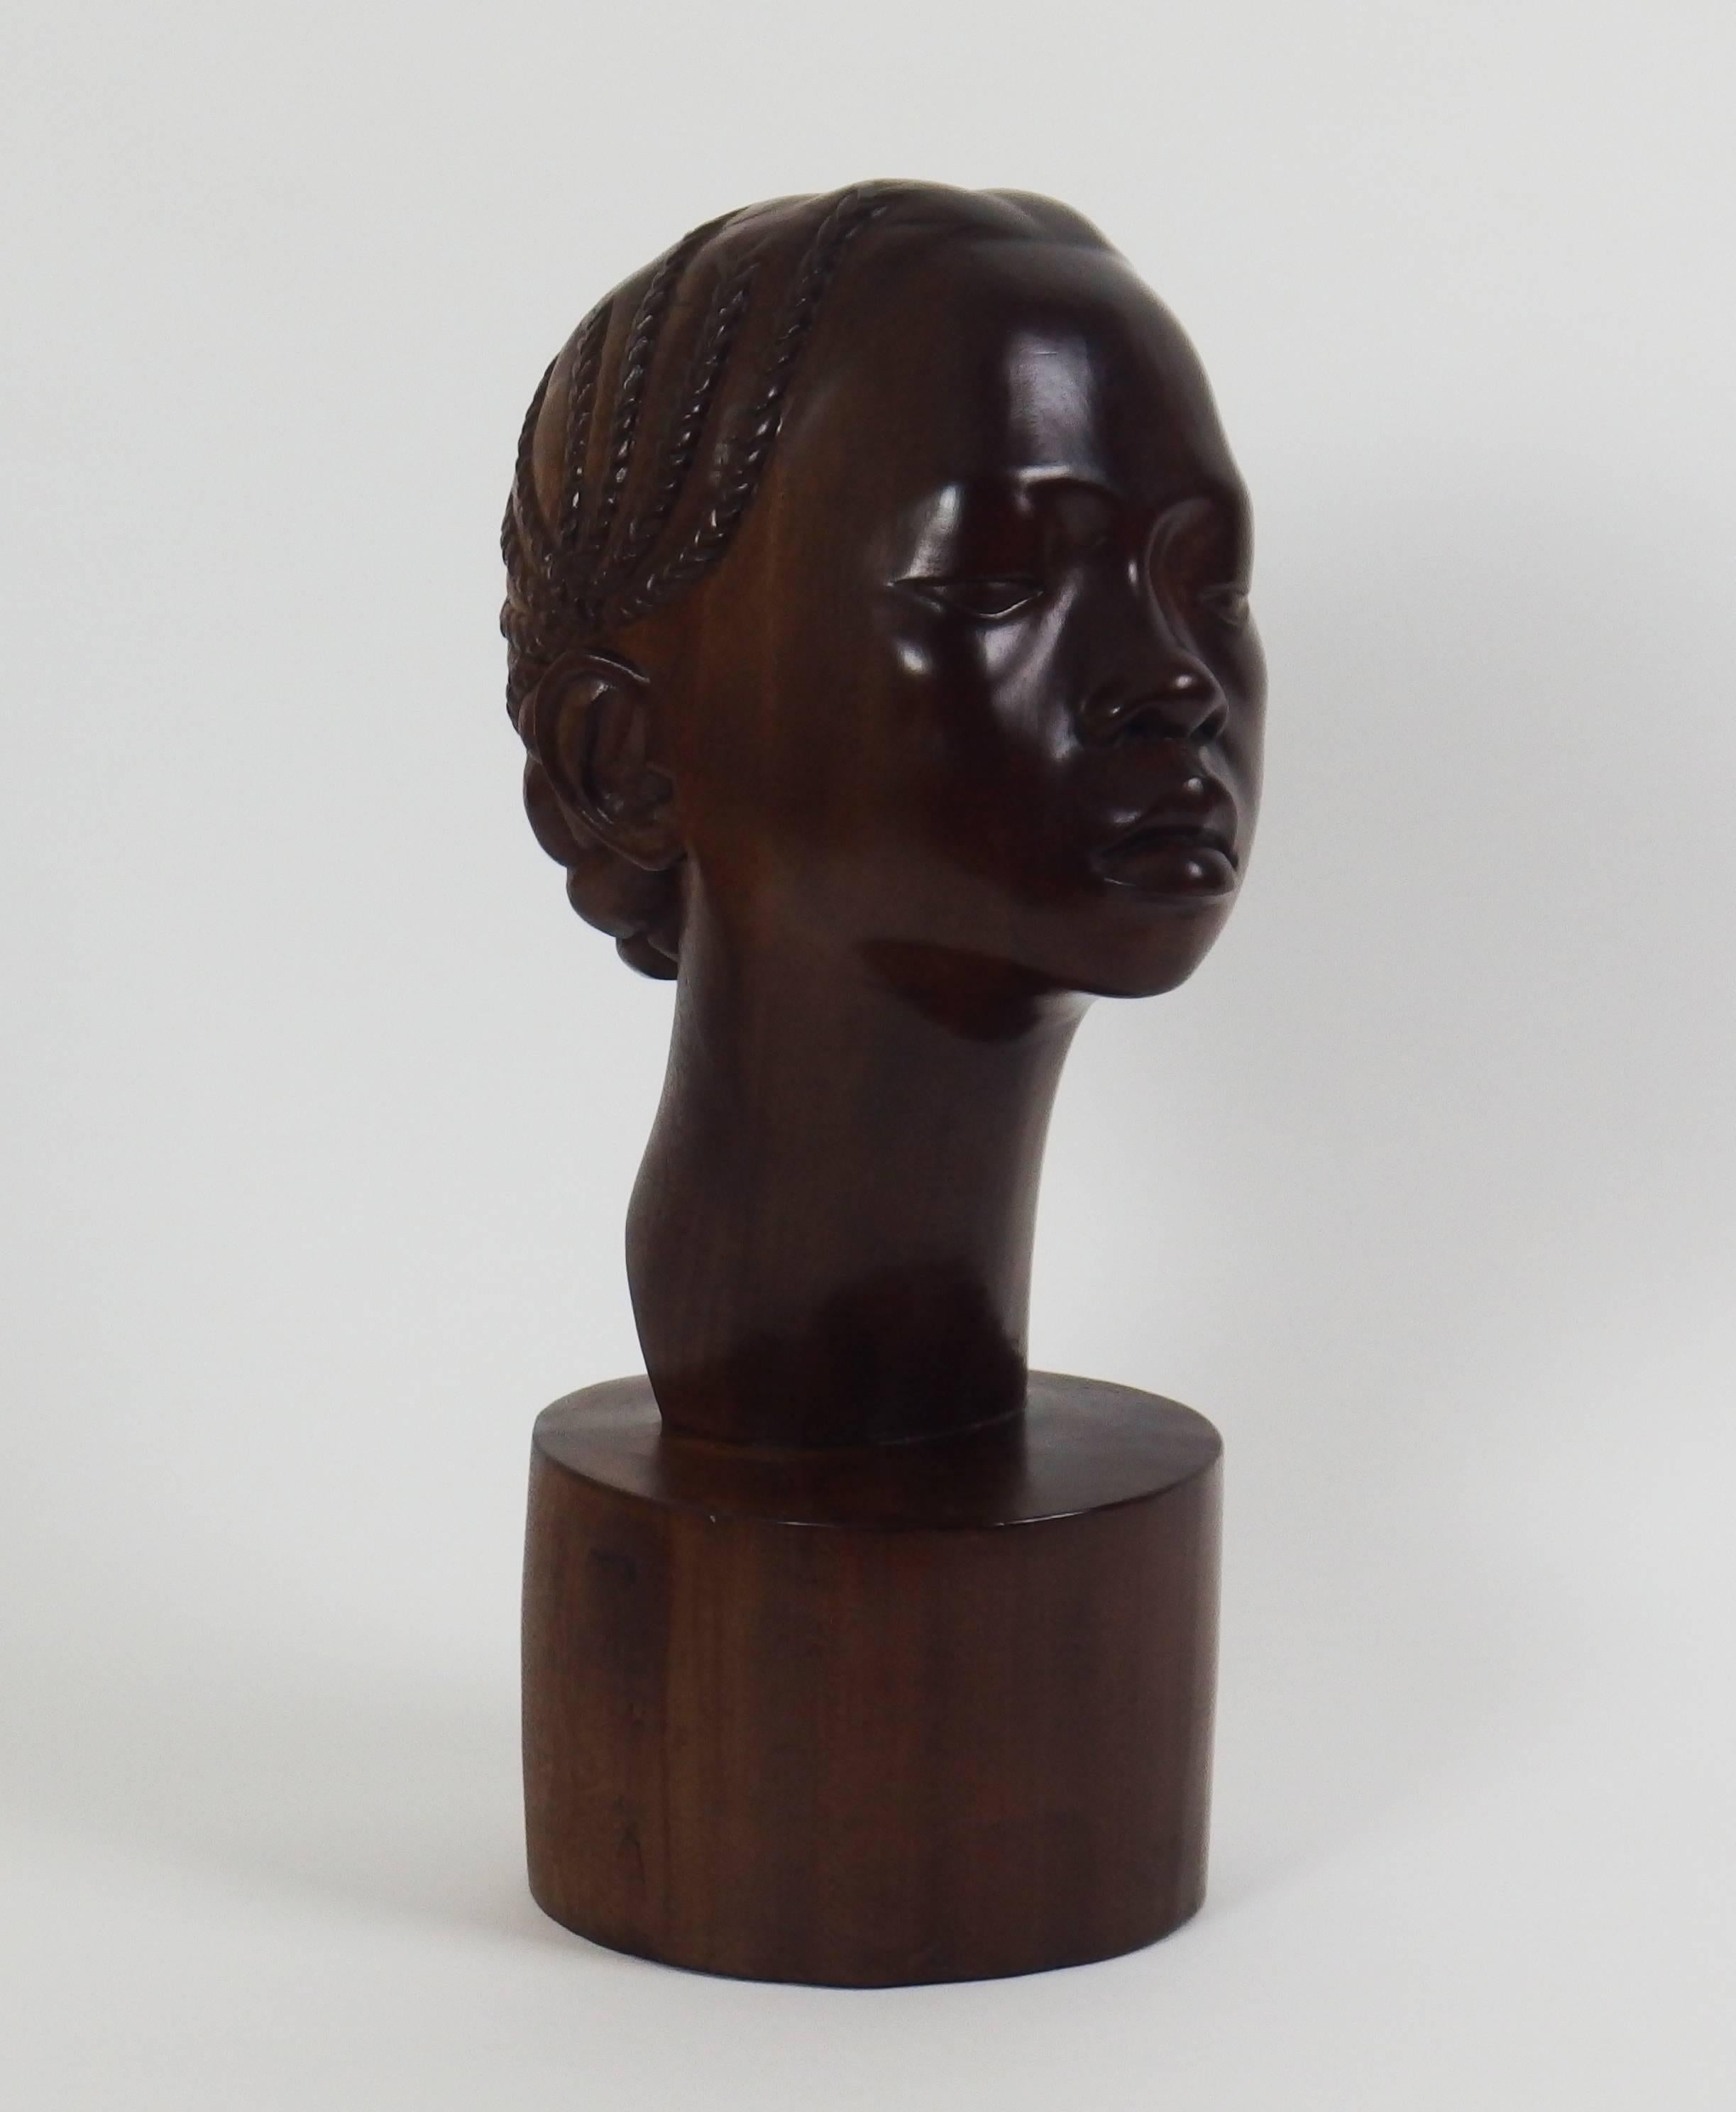 This young woman head in solid mahogany was sculpted by a Madagascan artist in 1940. Signed E.Rakotondrabé and dated 1940, under the sculpture.